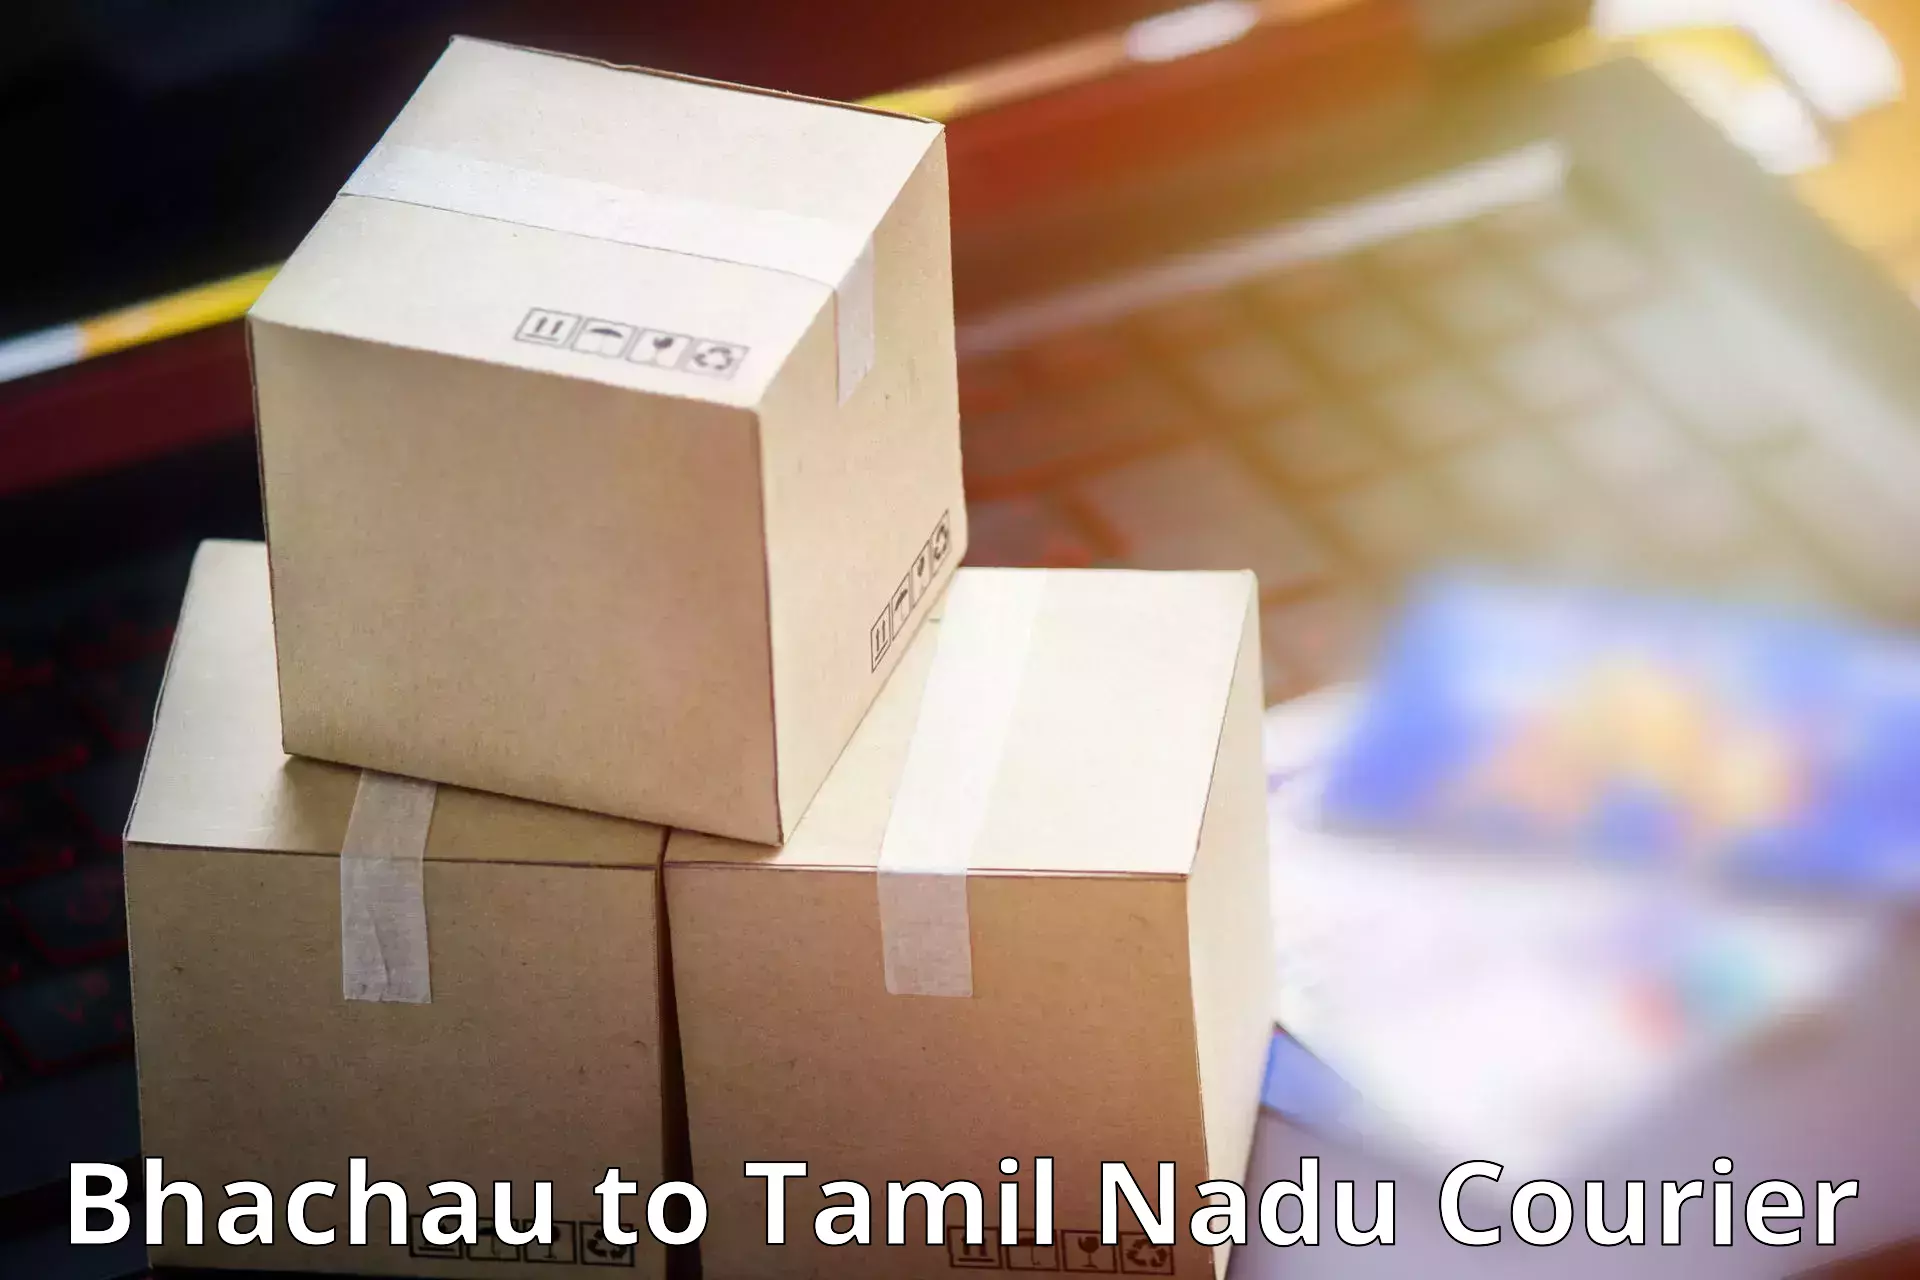 Multi-service courier options Bhachau to Kulithalai